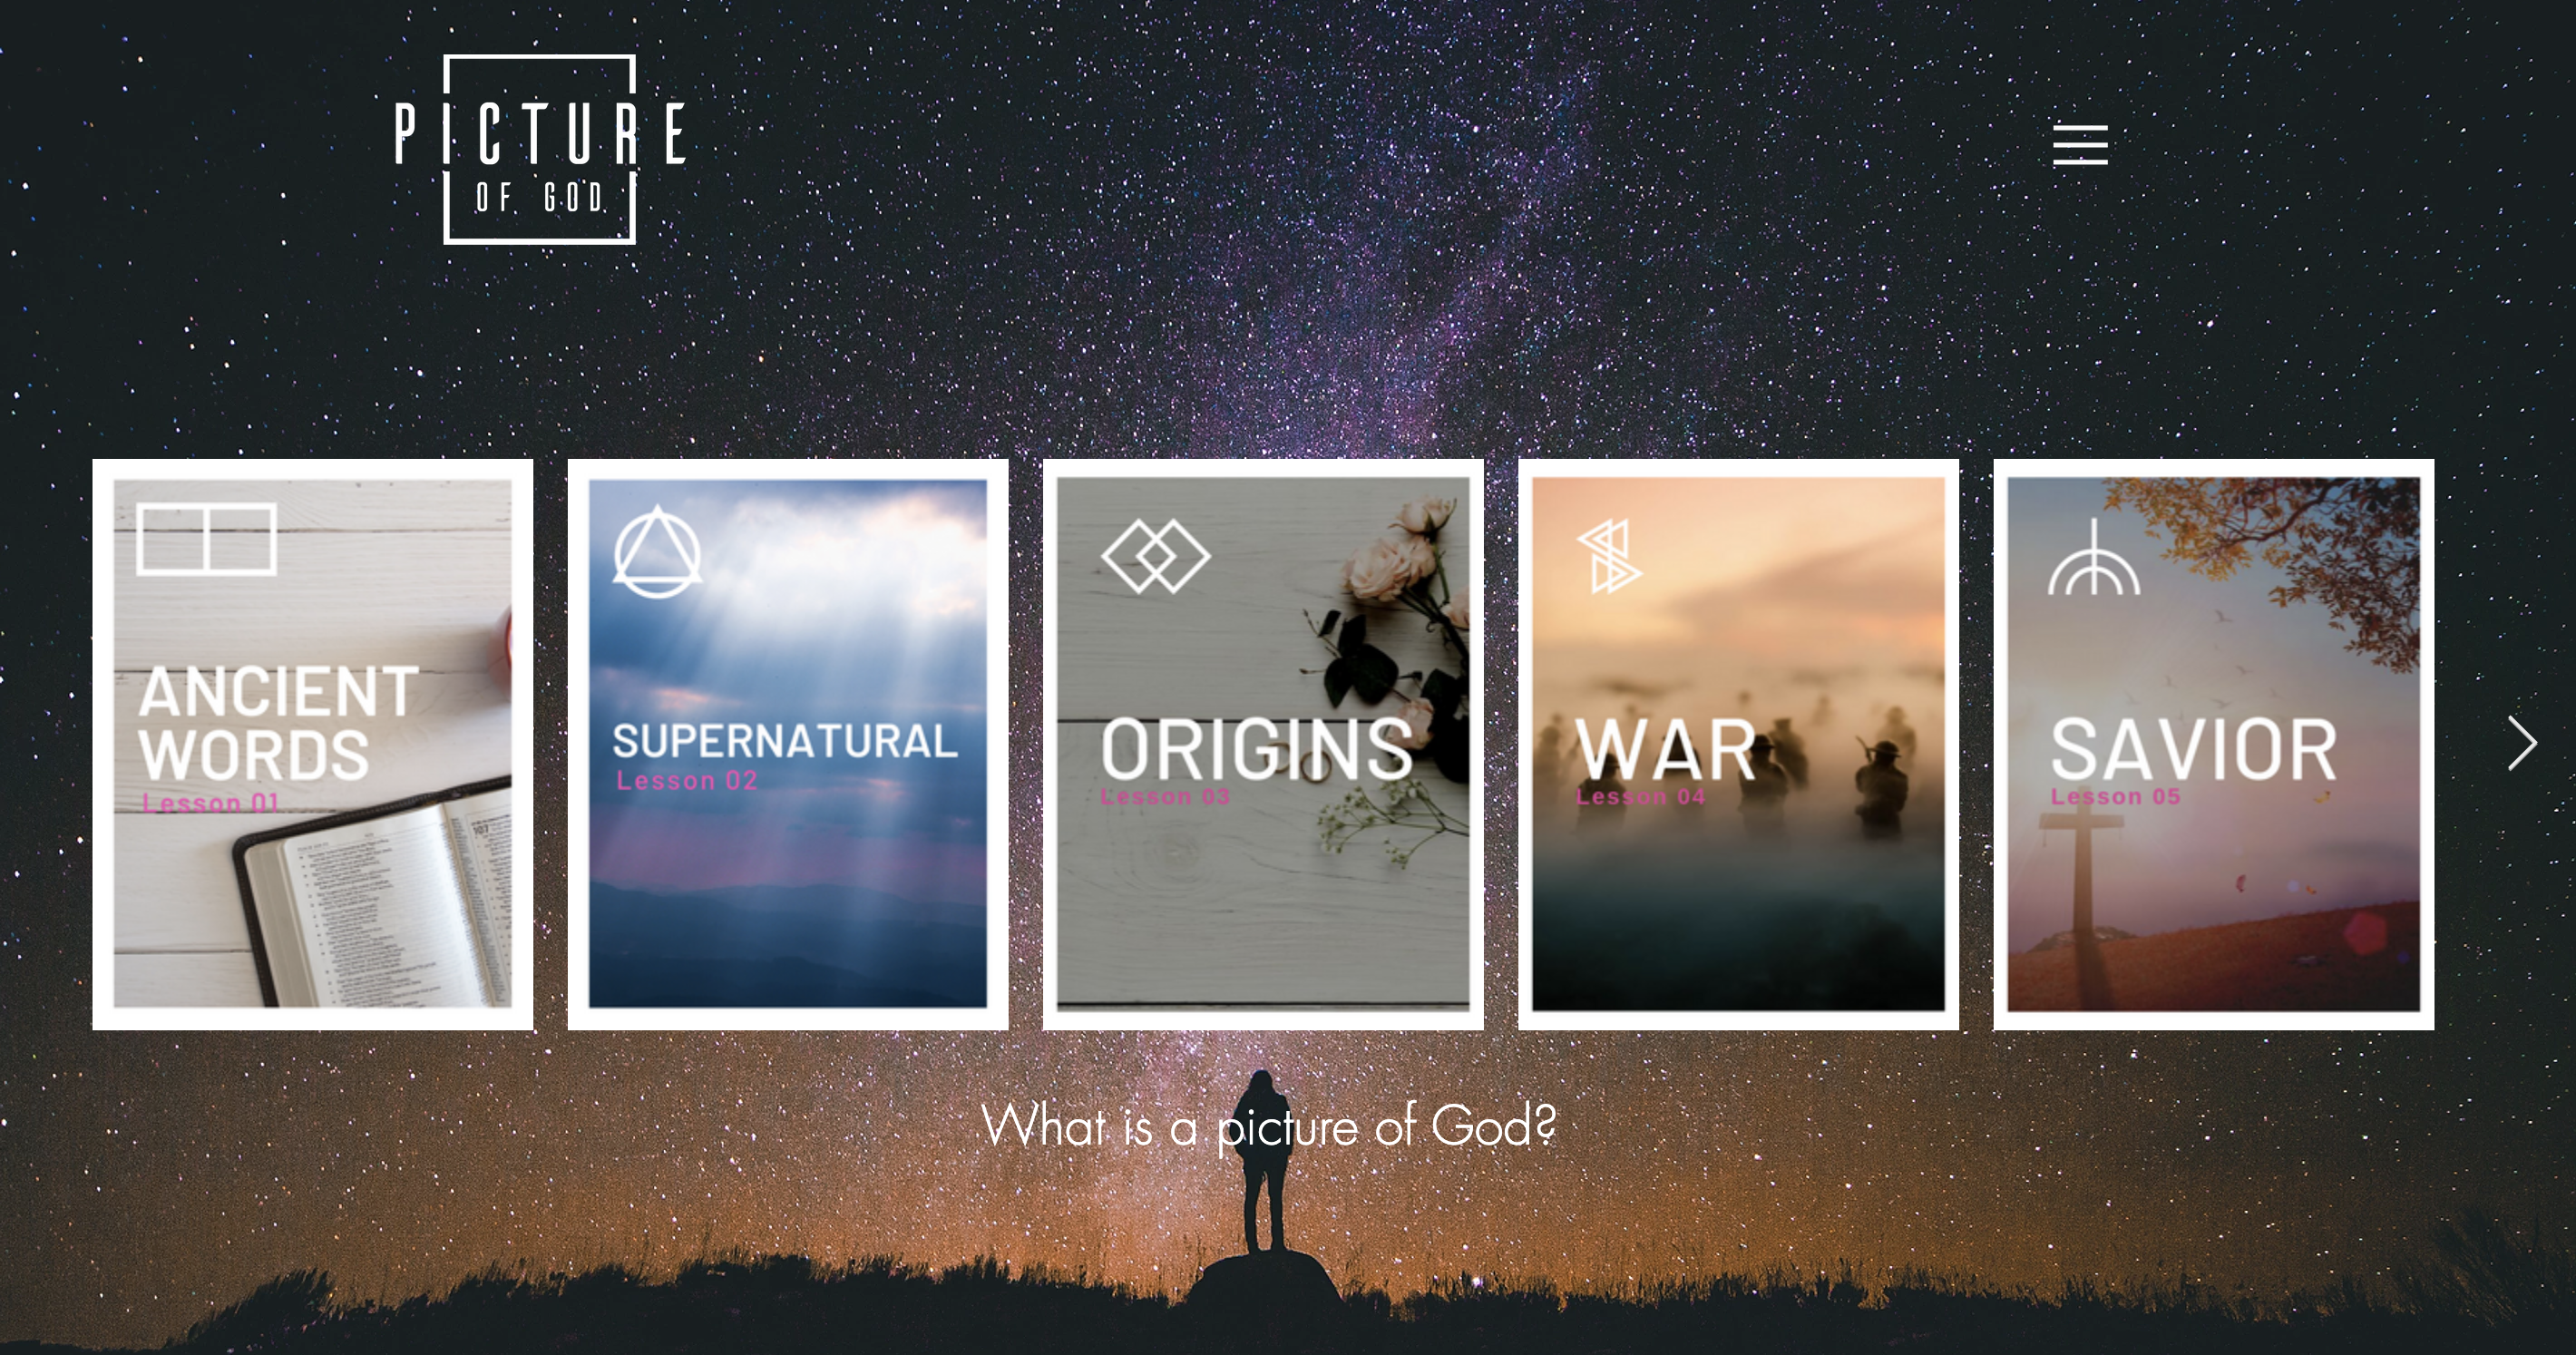 “A Picture of God” offers 16 free, online, easy-to-navigate lessons that build on each other to reveal God’s character to seekers. Photo:  A screenshot of the homepage for “A Picture of God.” 